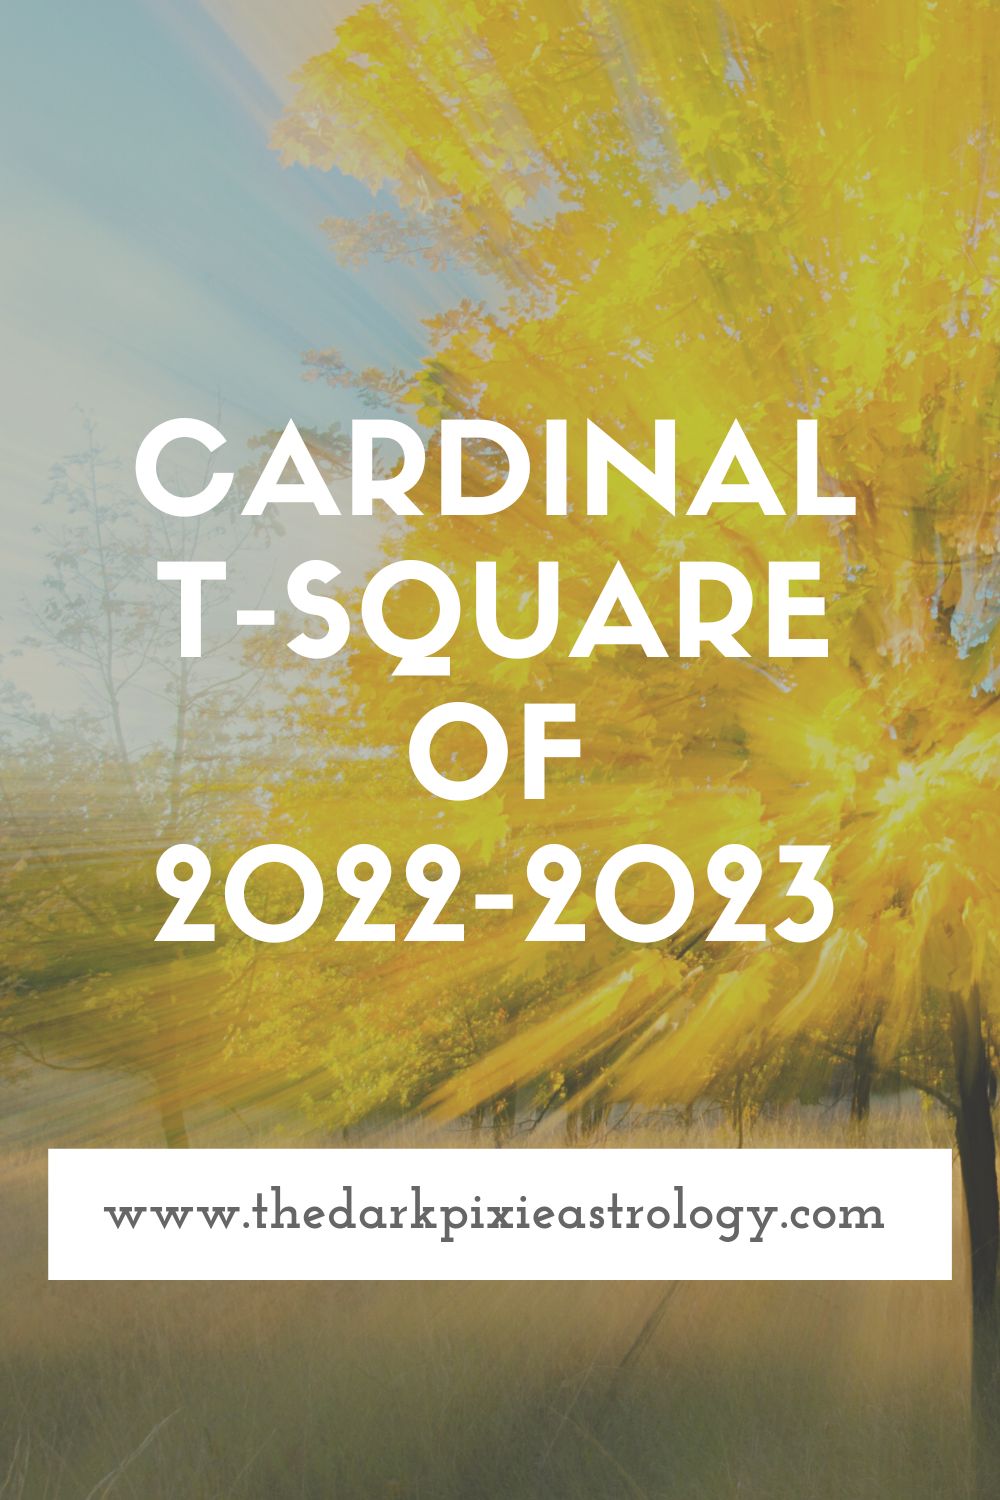 Cardinal T-Square of 2022-2023 - The Dark Pixie Astrology